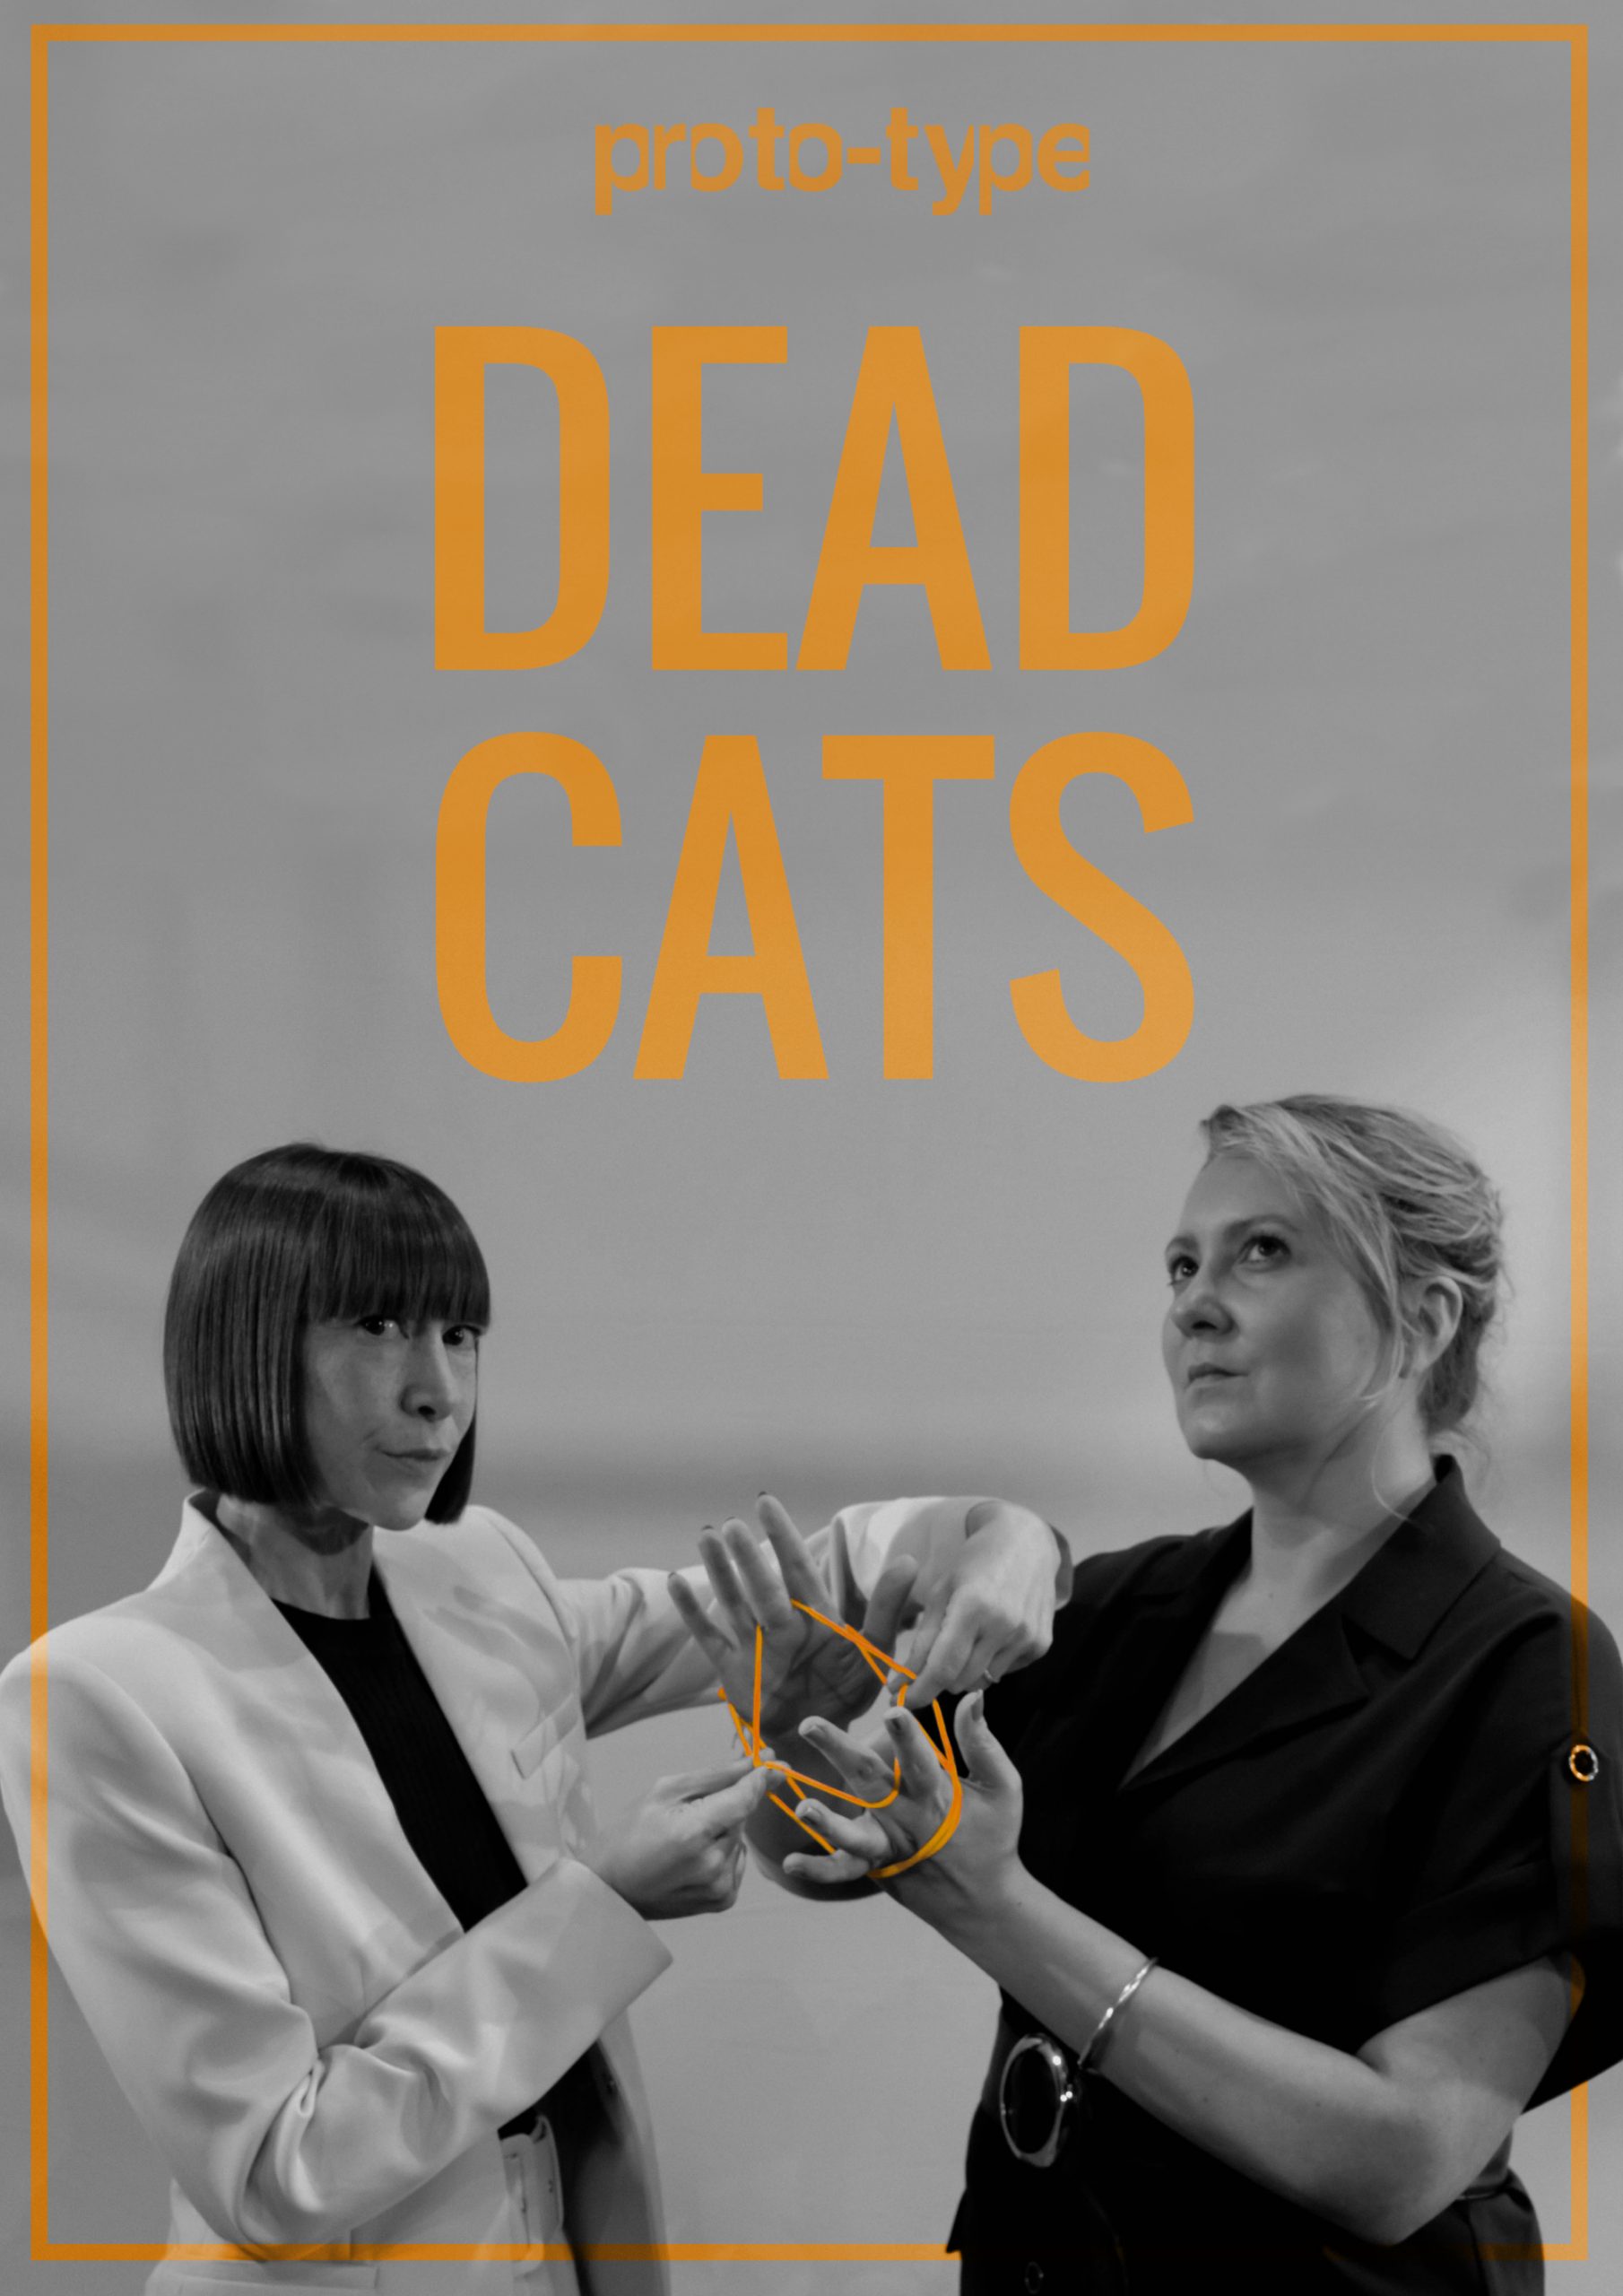 DEAD CATS written in orange text on a grey background. Below are two women, one in a white suit with a dark bob. One in a navy jumpsuit style top, with blond hair. They are playing 'cats cradle' with orange string. 'White suit' looks out at us sternly, 'navy' looks up with feigned innocence.